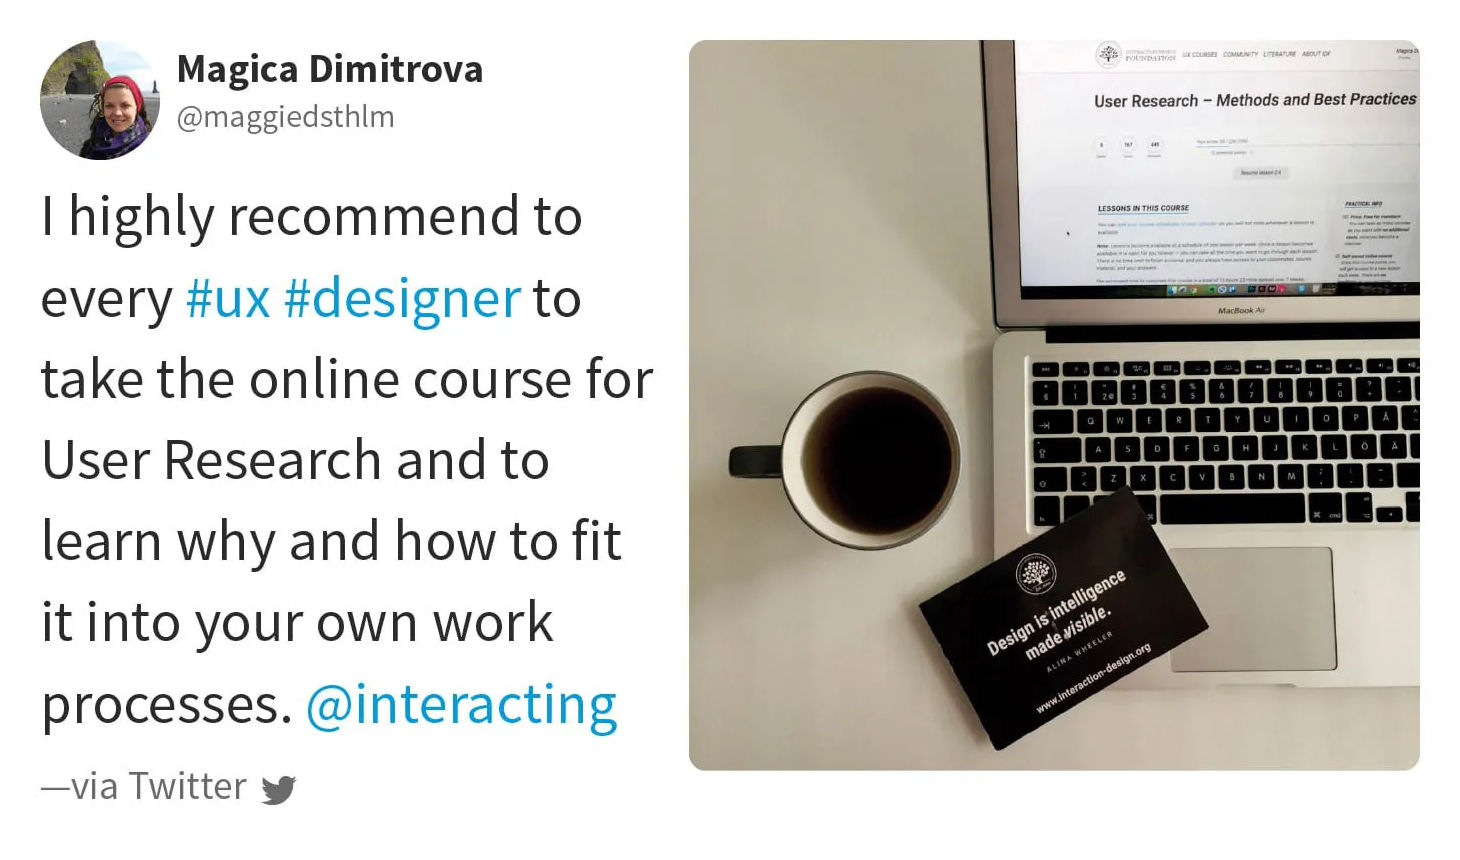 Quote from Magica Dimitrova via Twitter: I highly recommend to every UX designer to take the online course for User Research and to learn why and how to fit it into your own work processes.